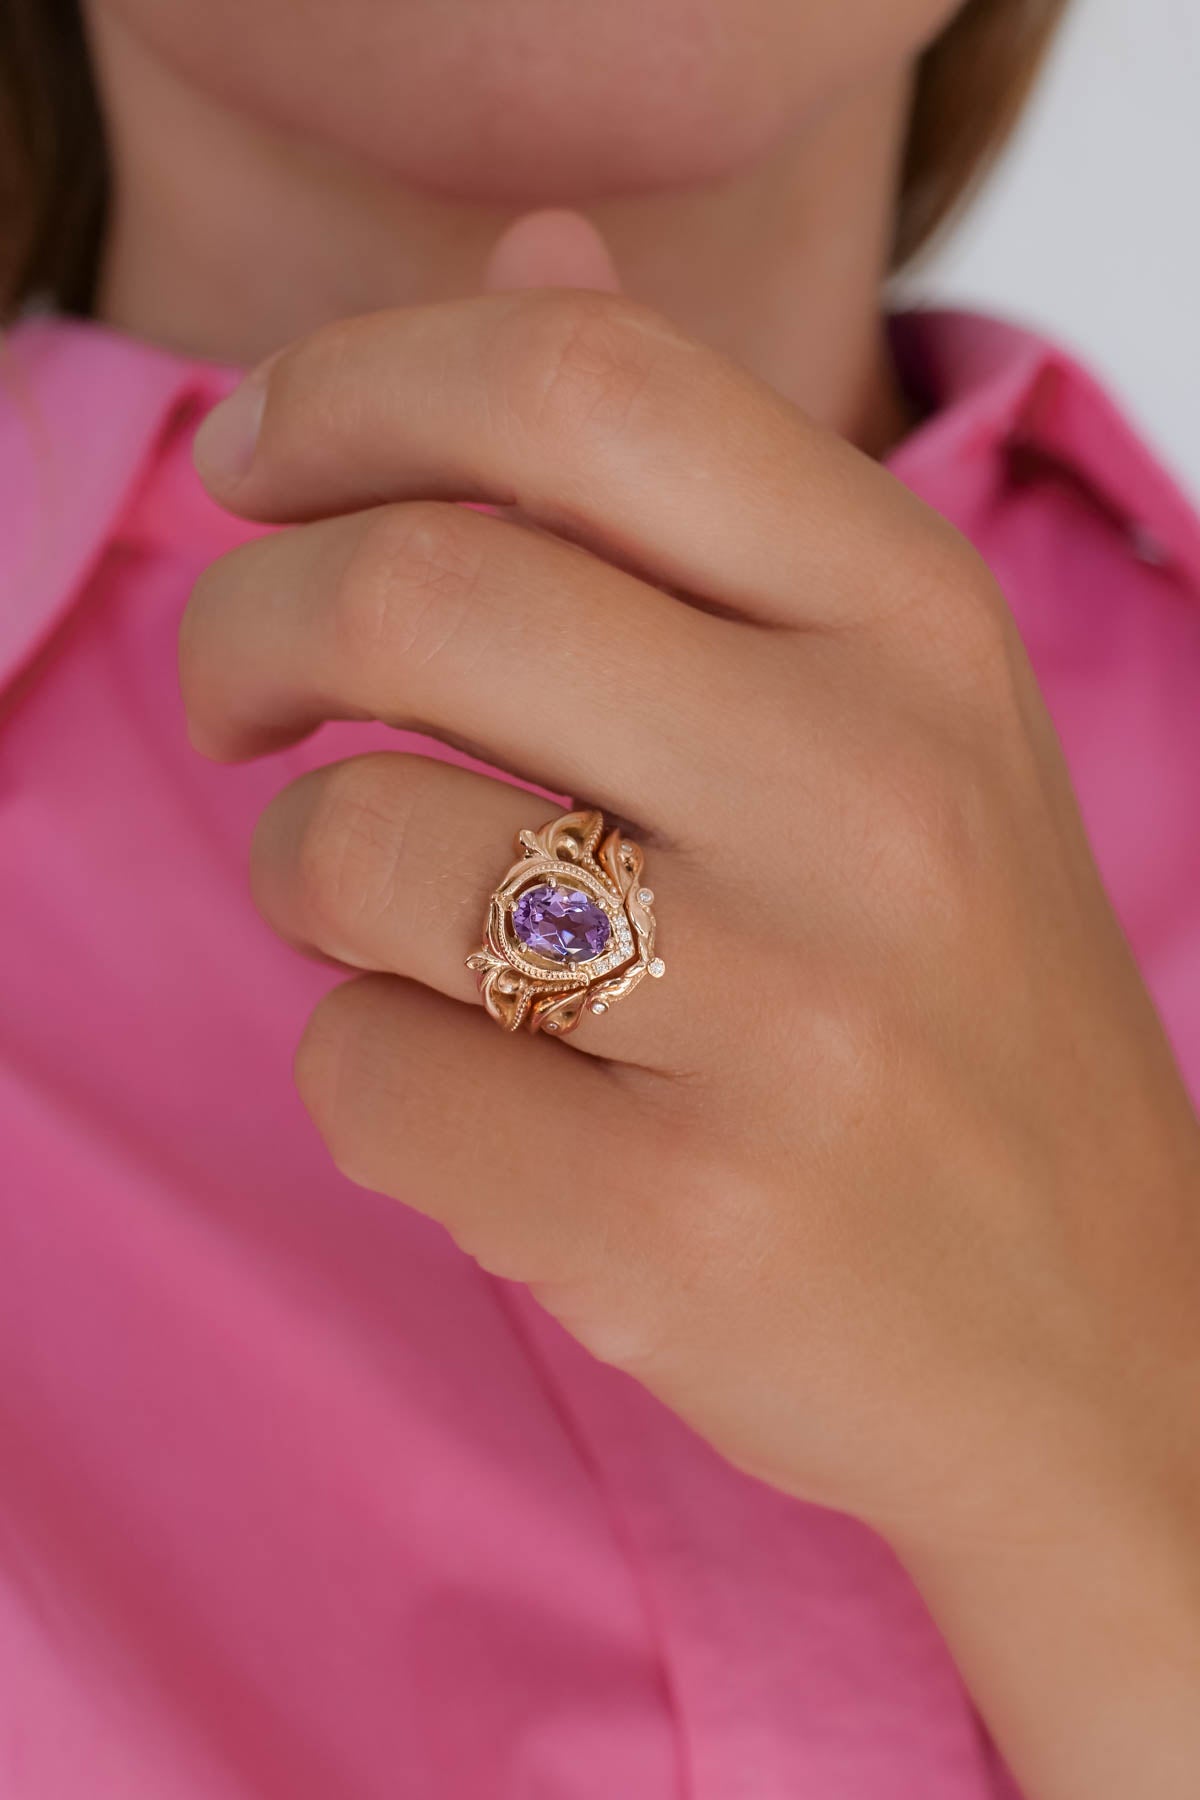 Diamond engagement ring with amethyst, unique promise ring / Lida - Eden Garden Jewelry™